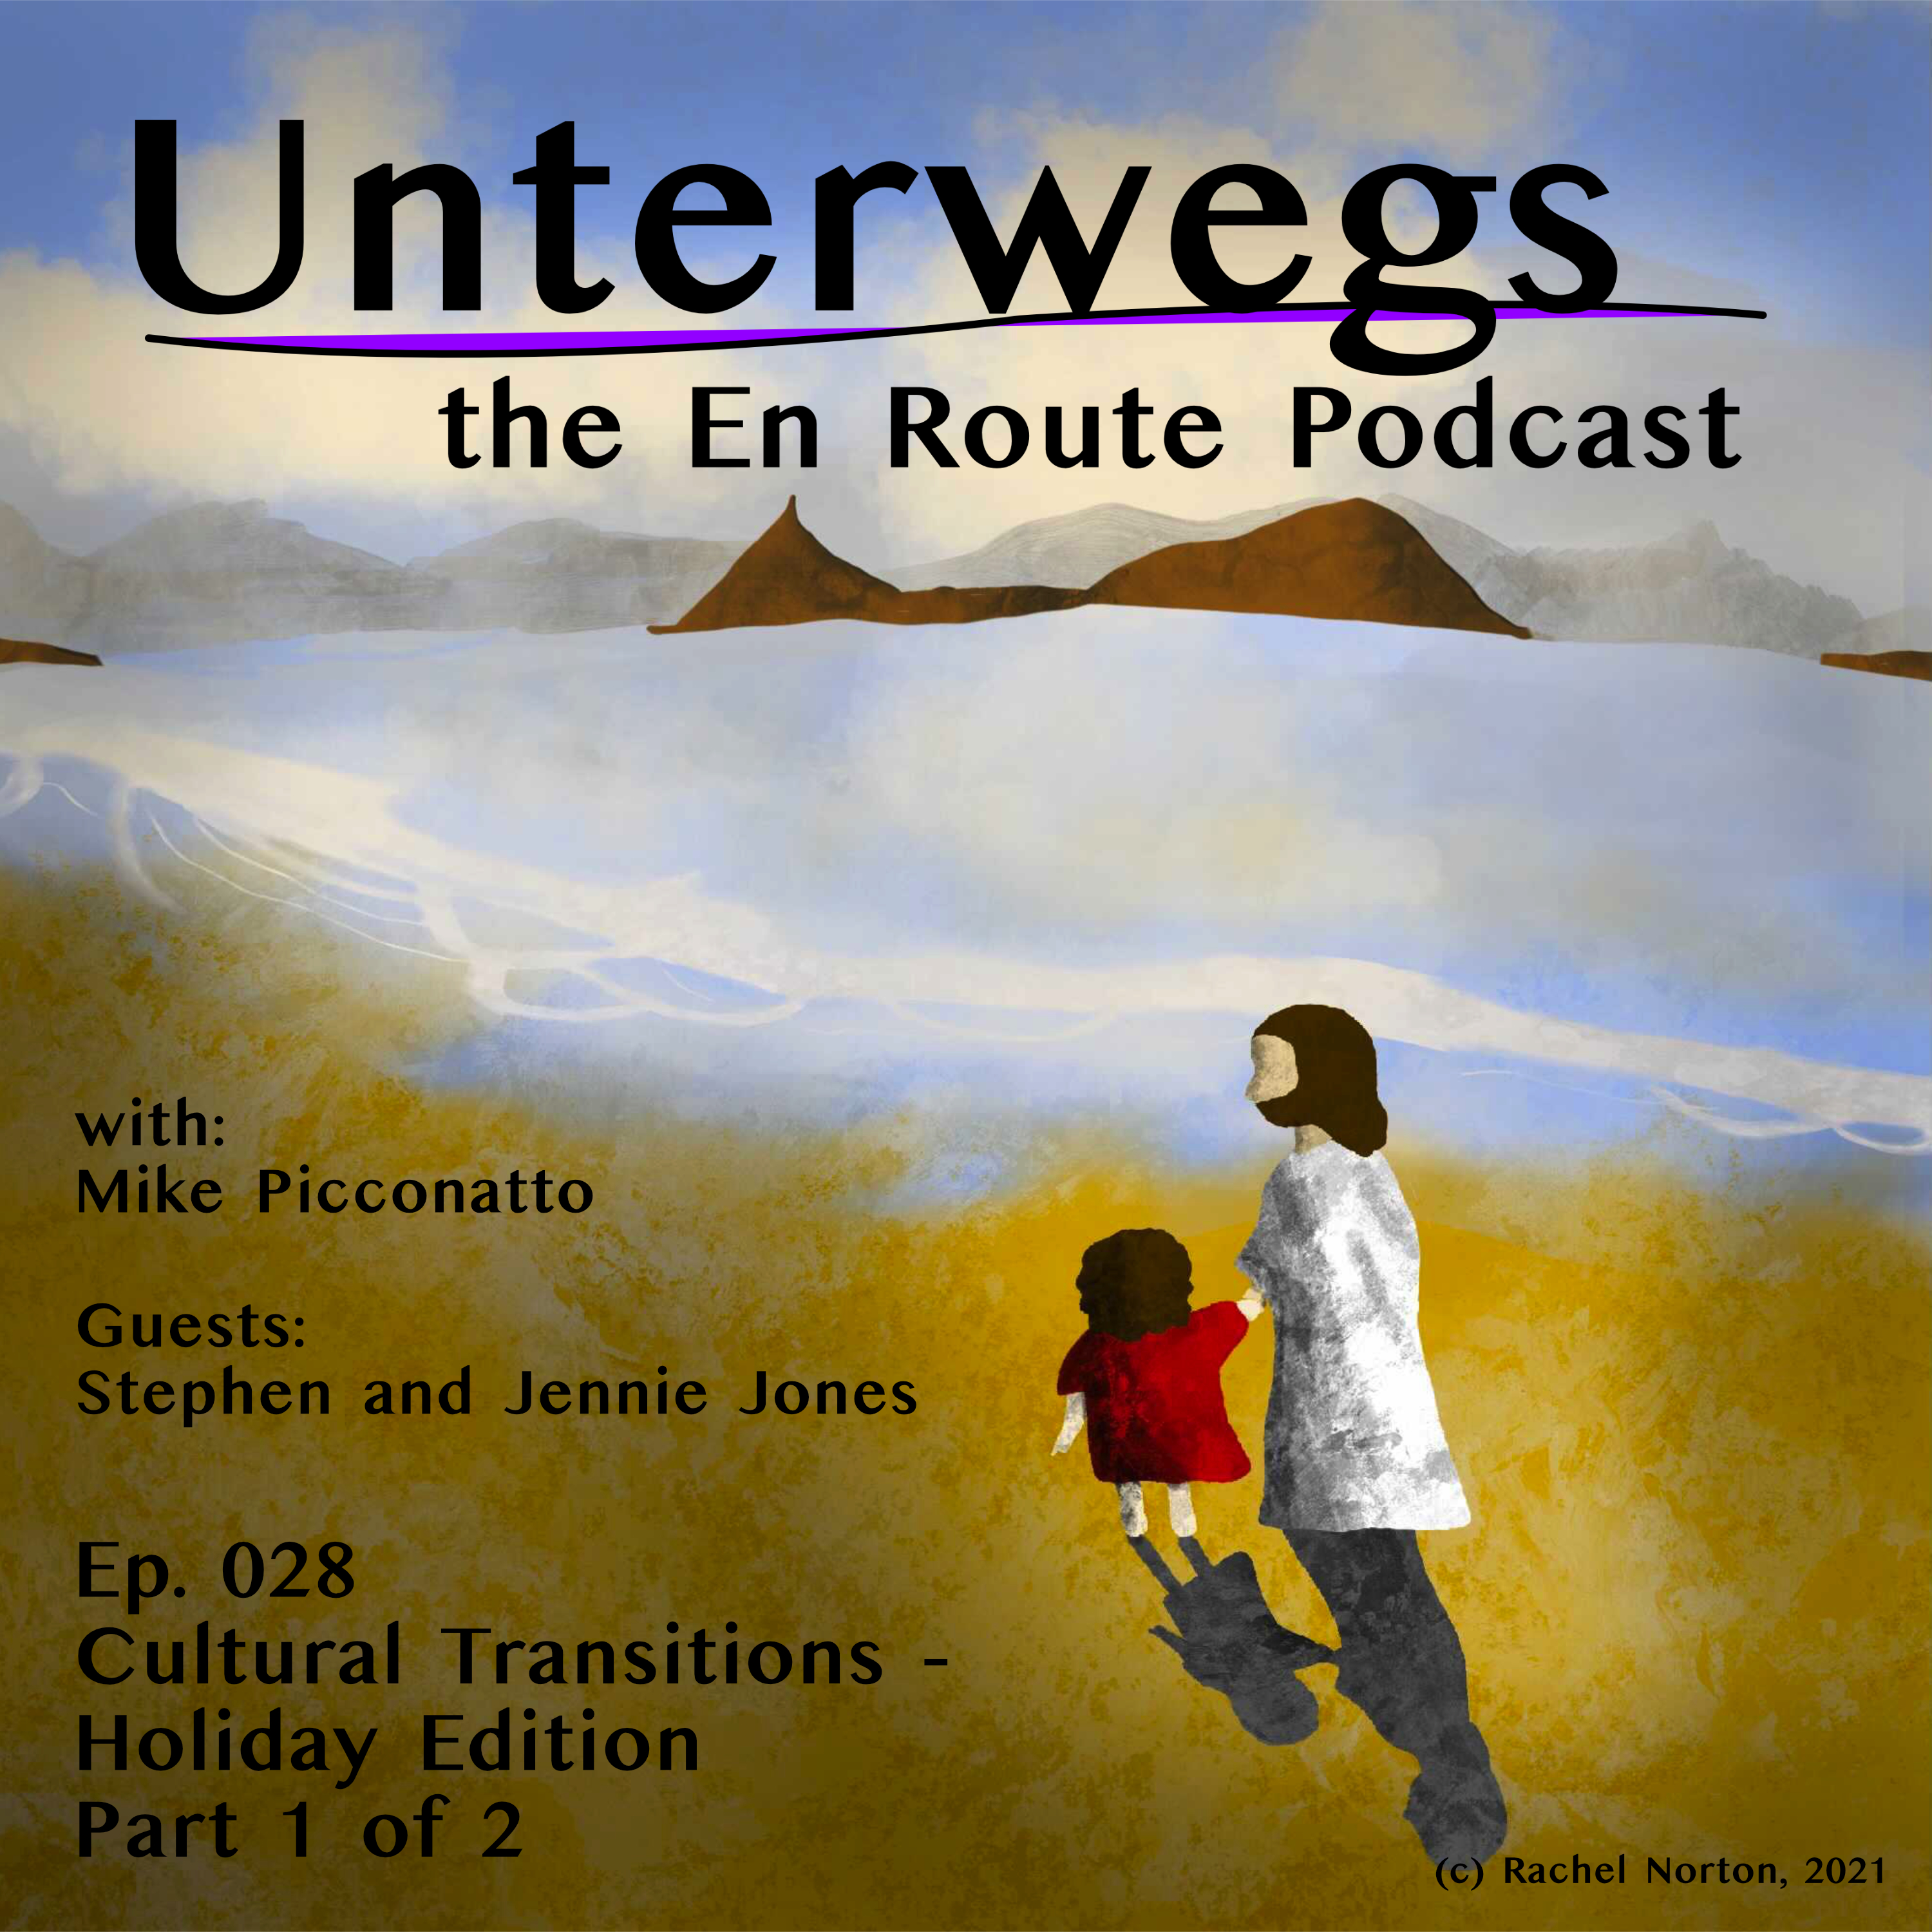 Episode 028 - Cultural Transitions - Holiday Edition - part 1 of 2